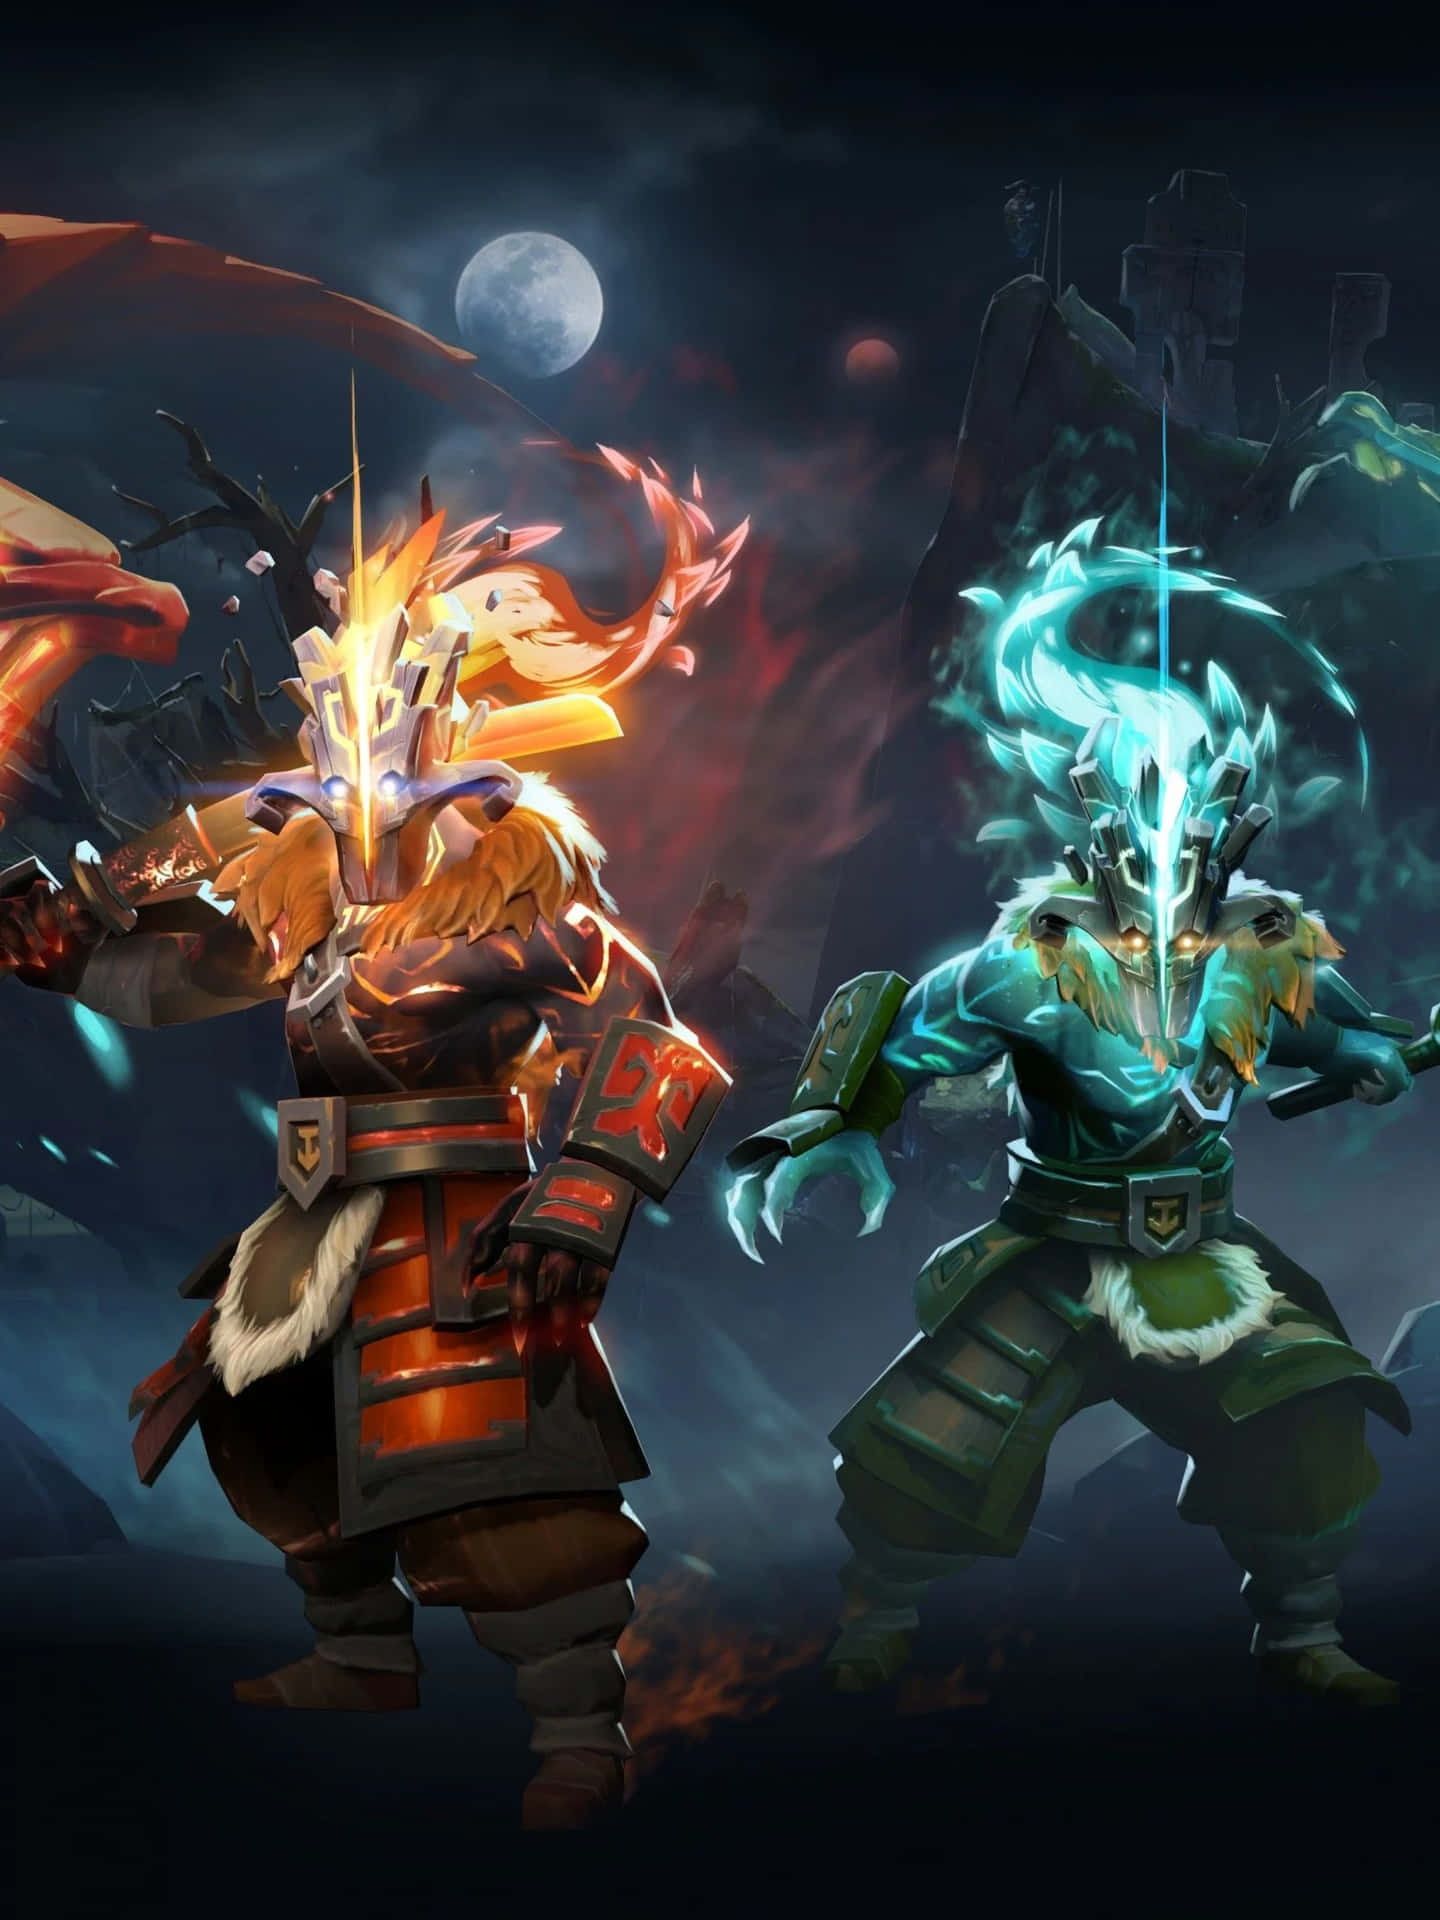 Be One Step Ahead! Play Dota 2 on Your Phone. Wallpaper